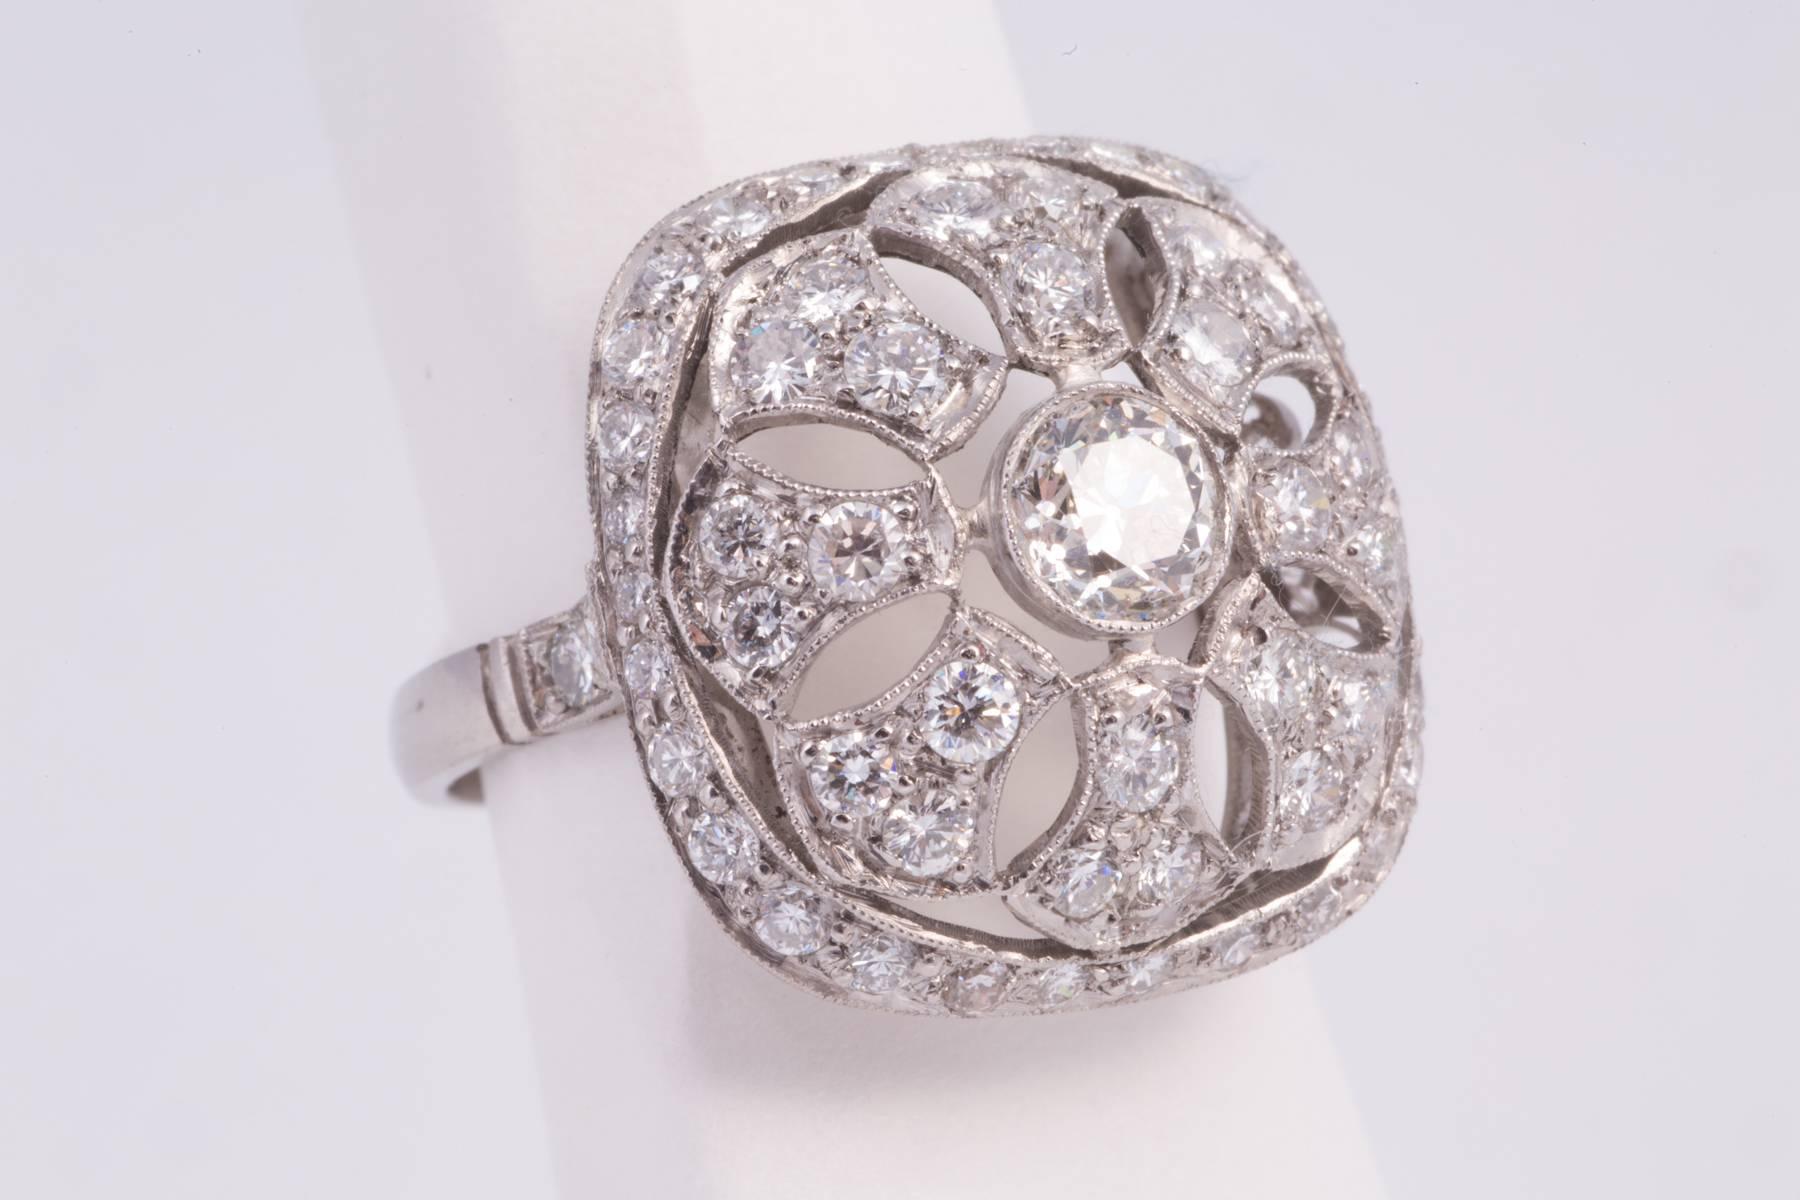 Antique european cut diamond filigree ring. The center is approx. .75ct, has G-H color and SI clarity. It is surrounded by 20 single cut round diamonds weighing approx. 1.00cts. The mounting is Platinum. Circa. 1940.